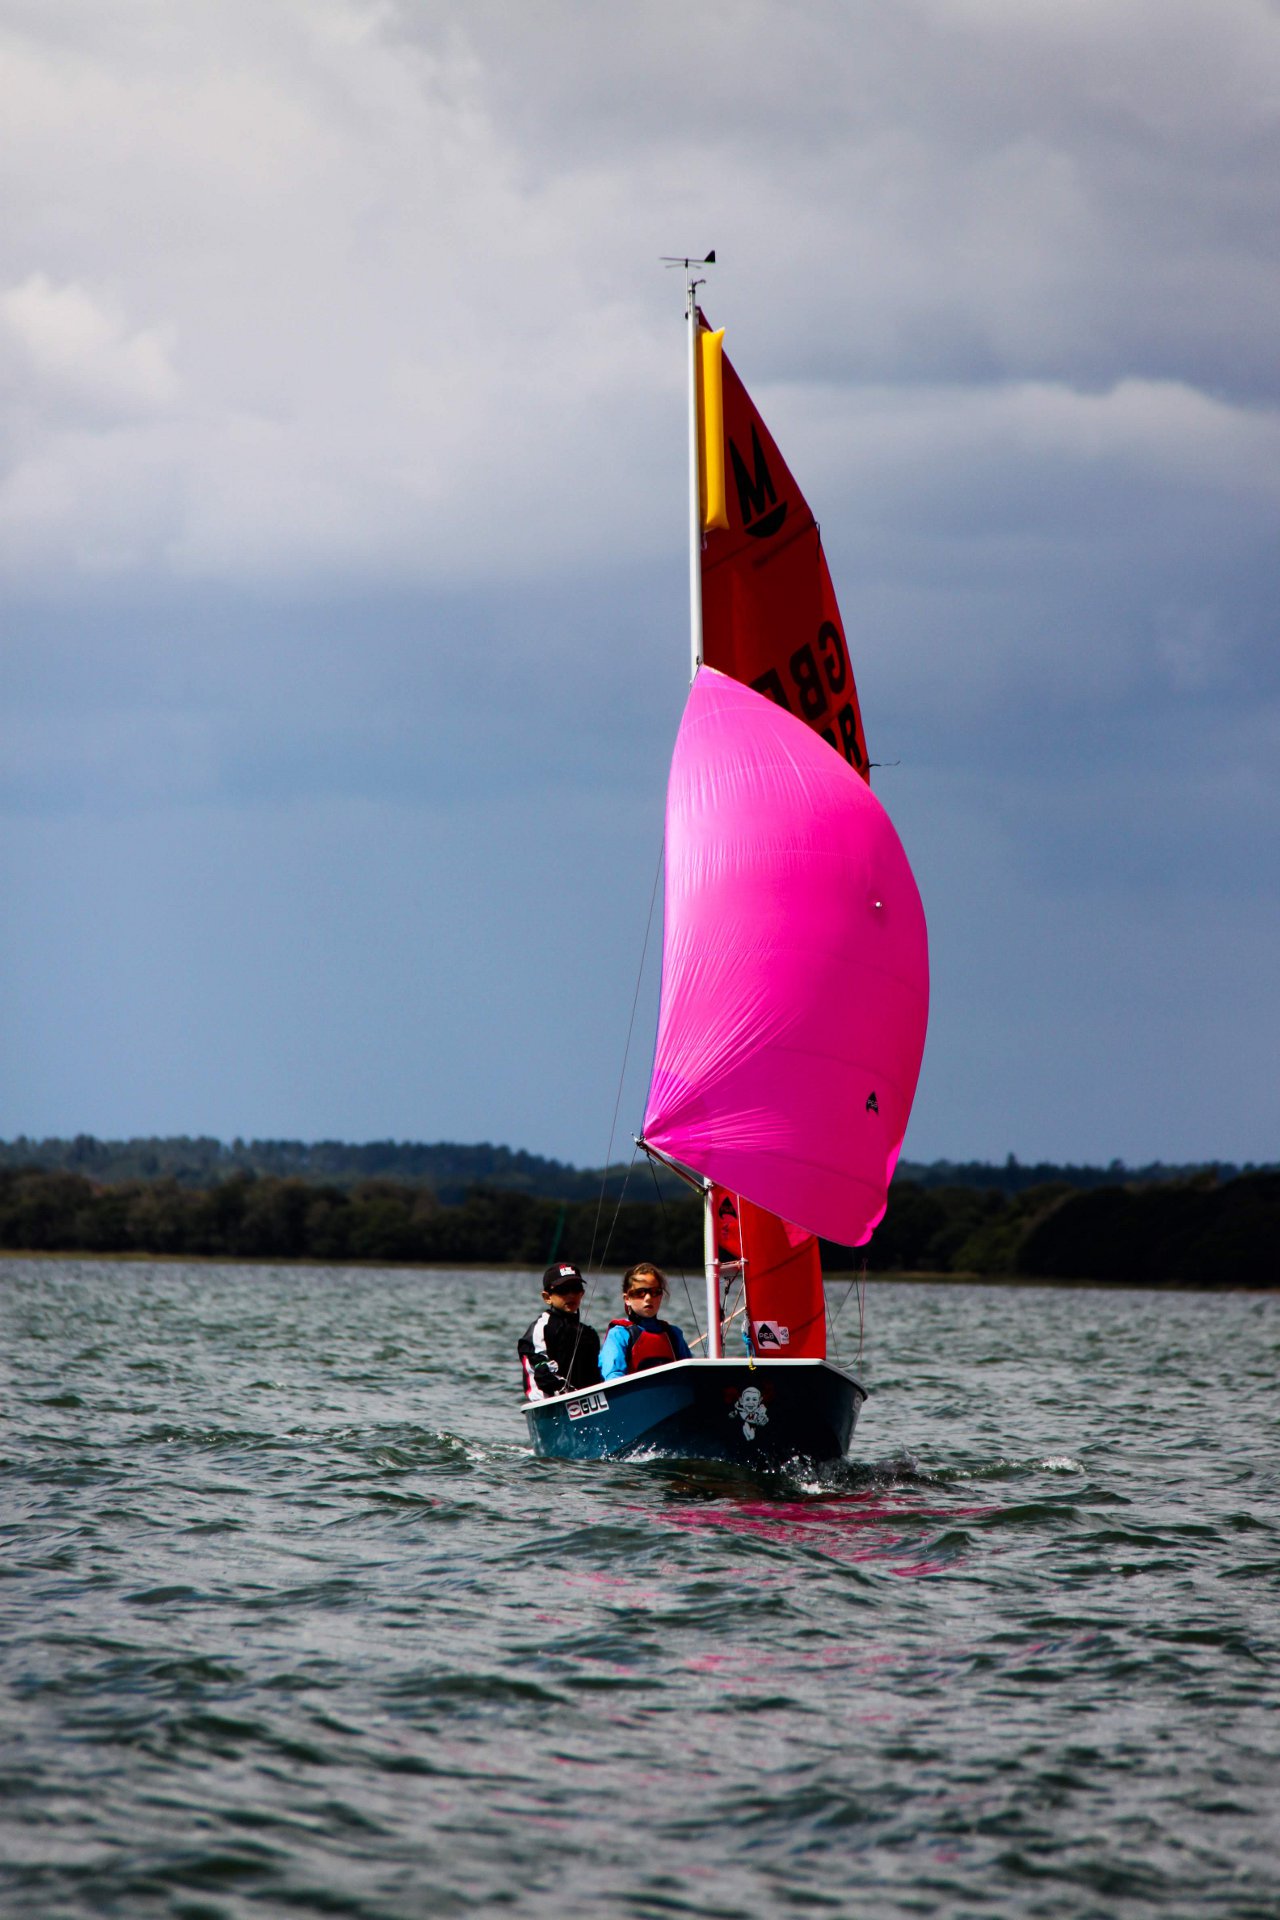 A blue and white GRP Mirror racing towards the camera with spinnaker set